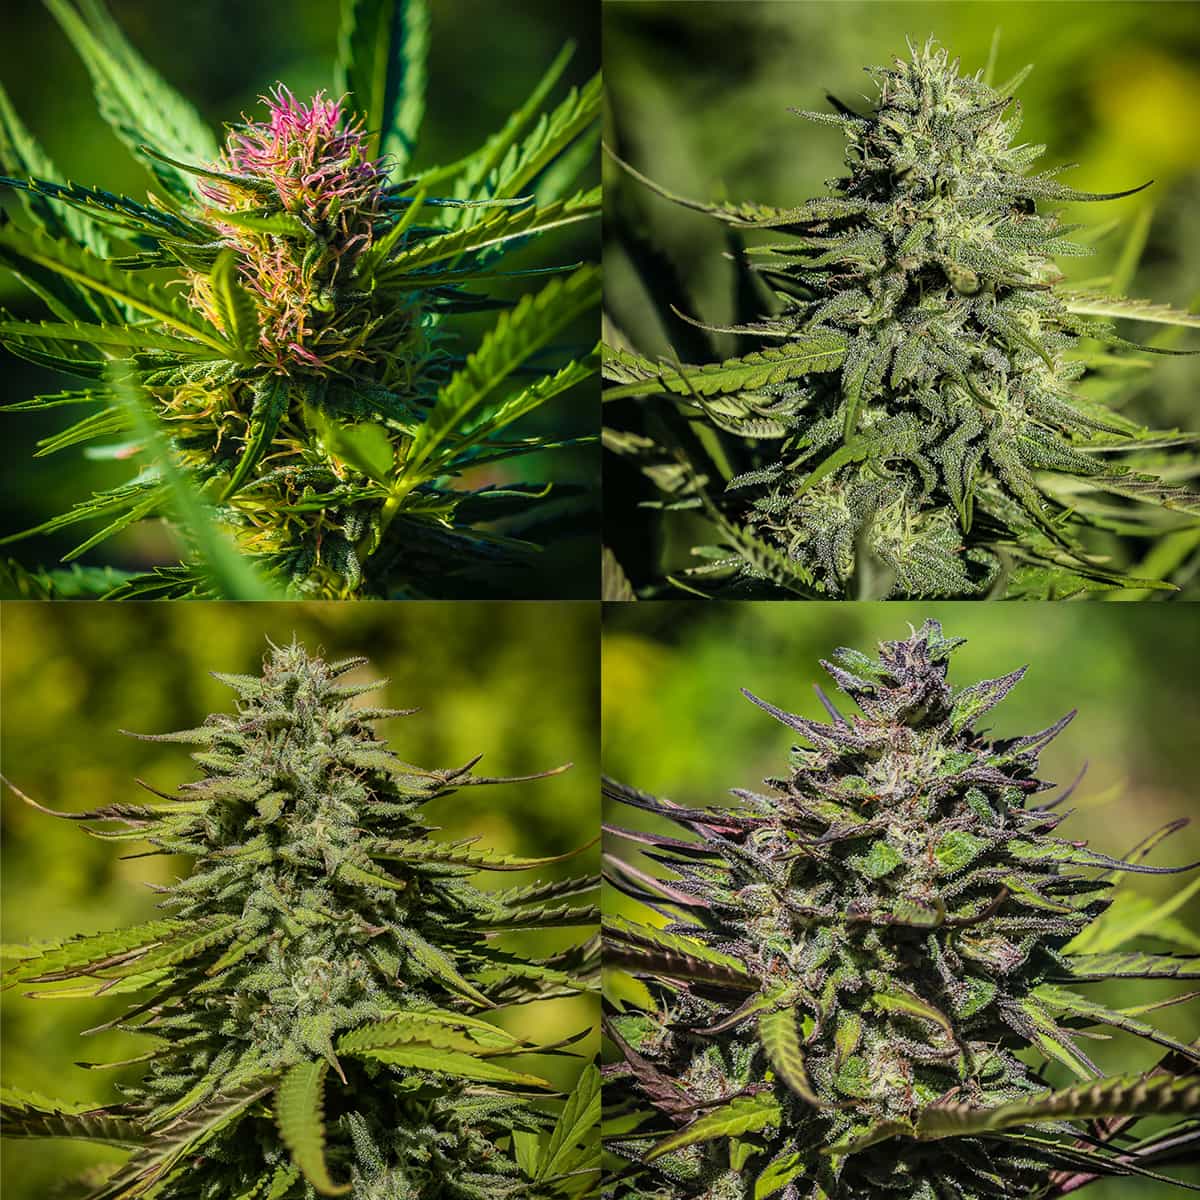 A pink haired Lifter flower, a green speckled Hawaiian Haze flower, a narrow leafed Suver Haze flower, and a dark purple Sour Space Candy flower. All four grown from feminized high cbd seeds outdoors.